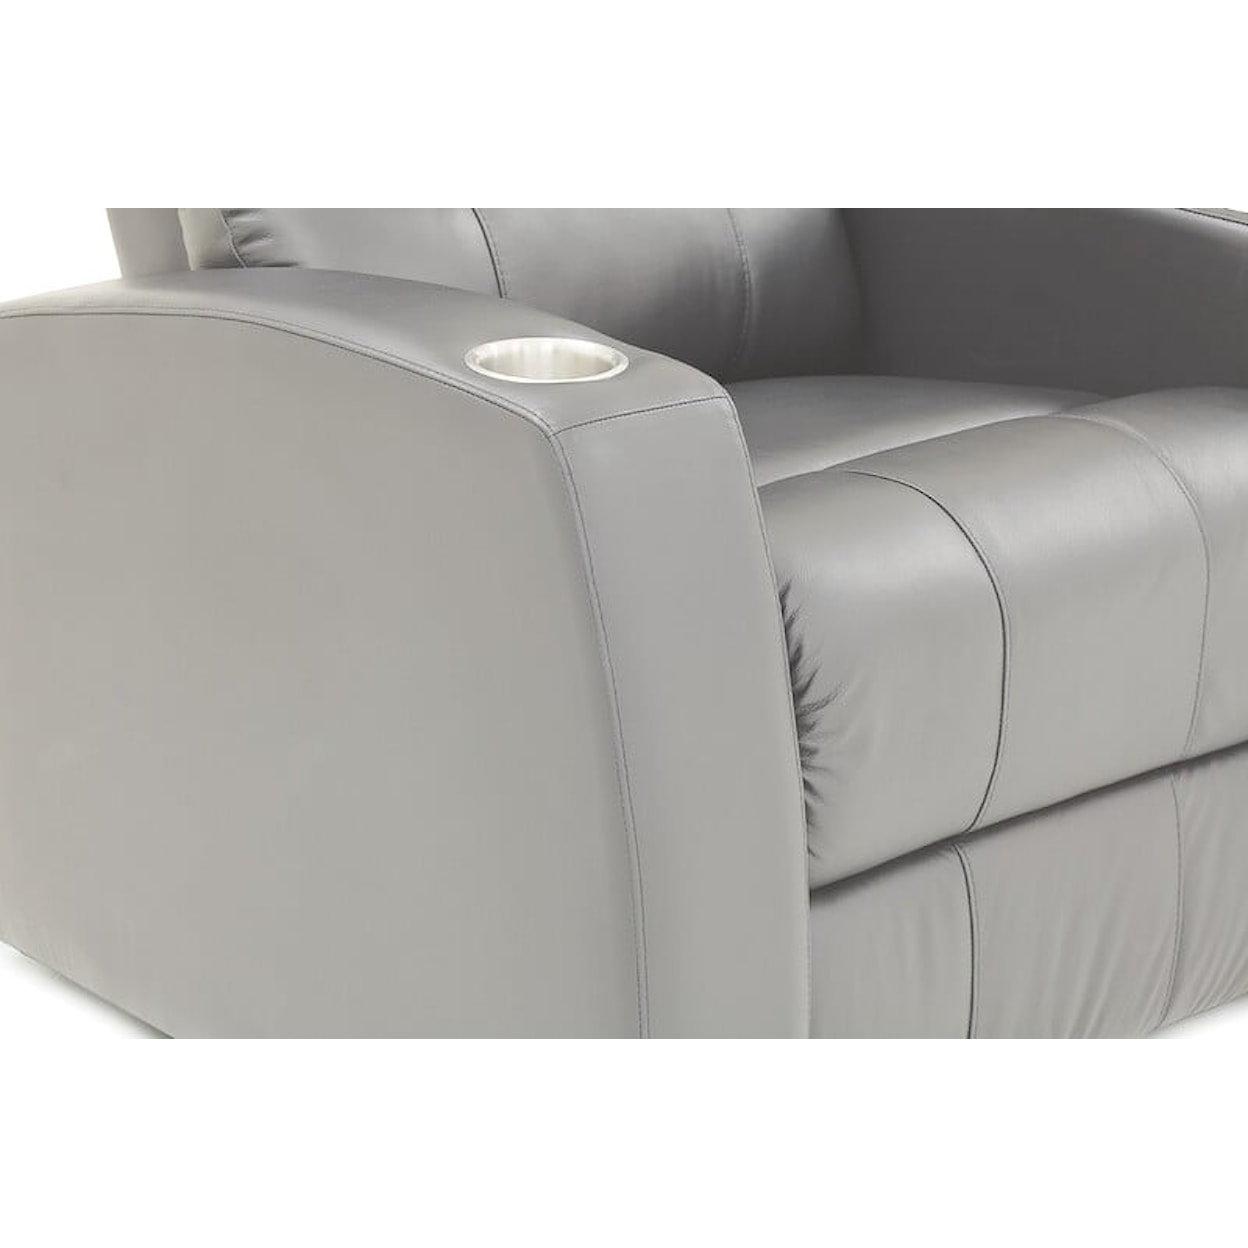 Palliser PACIFICO Pacifico 3-Seat Straight Layout